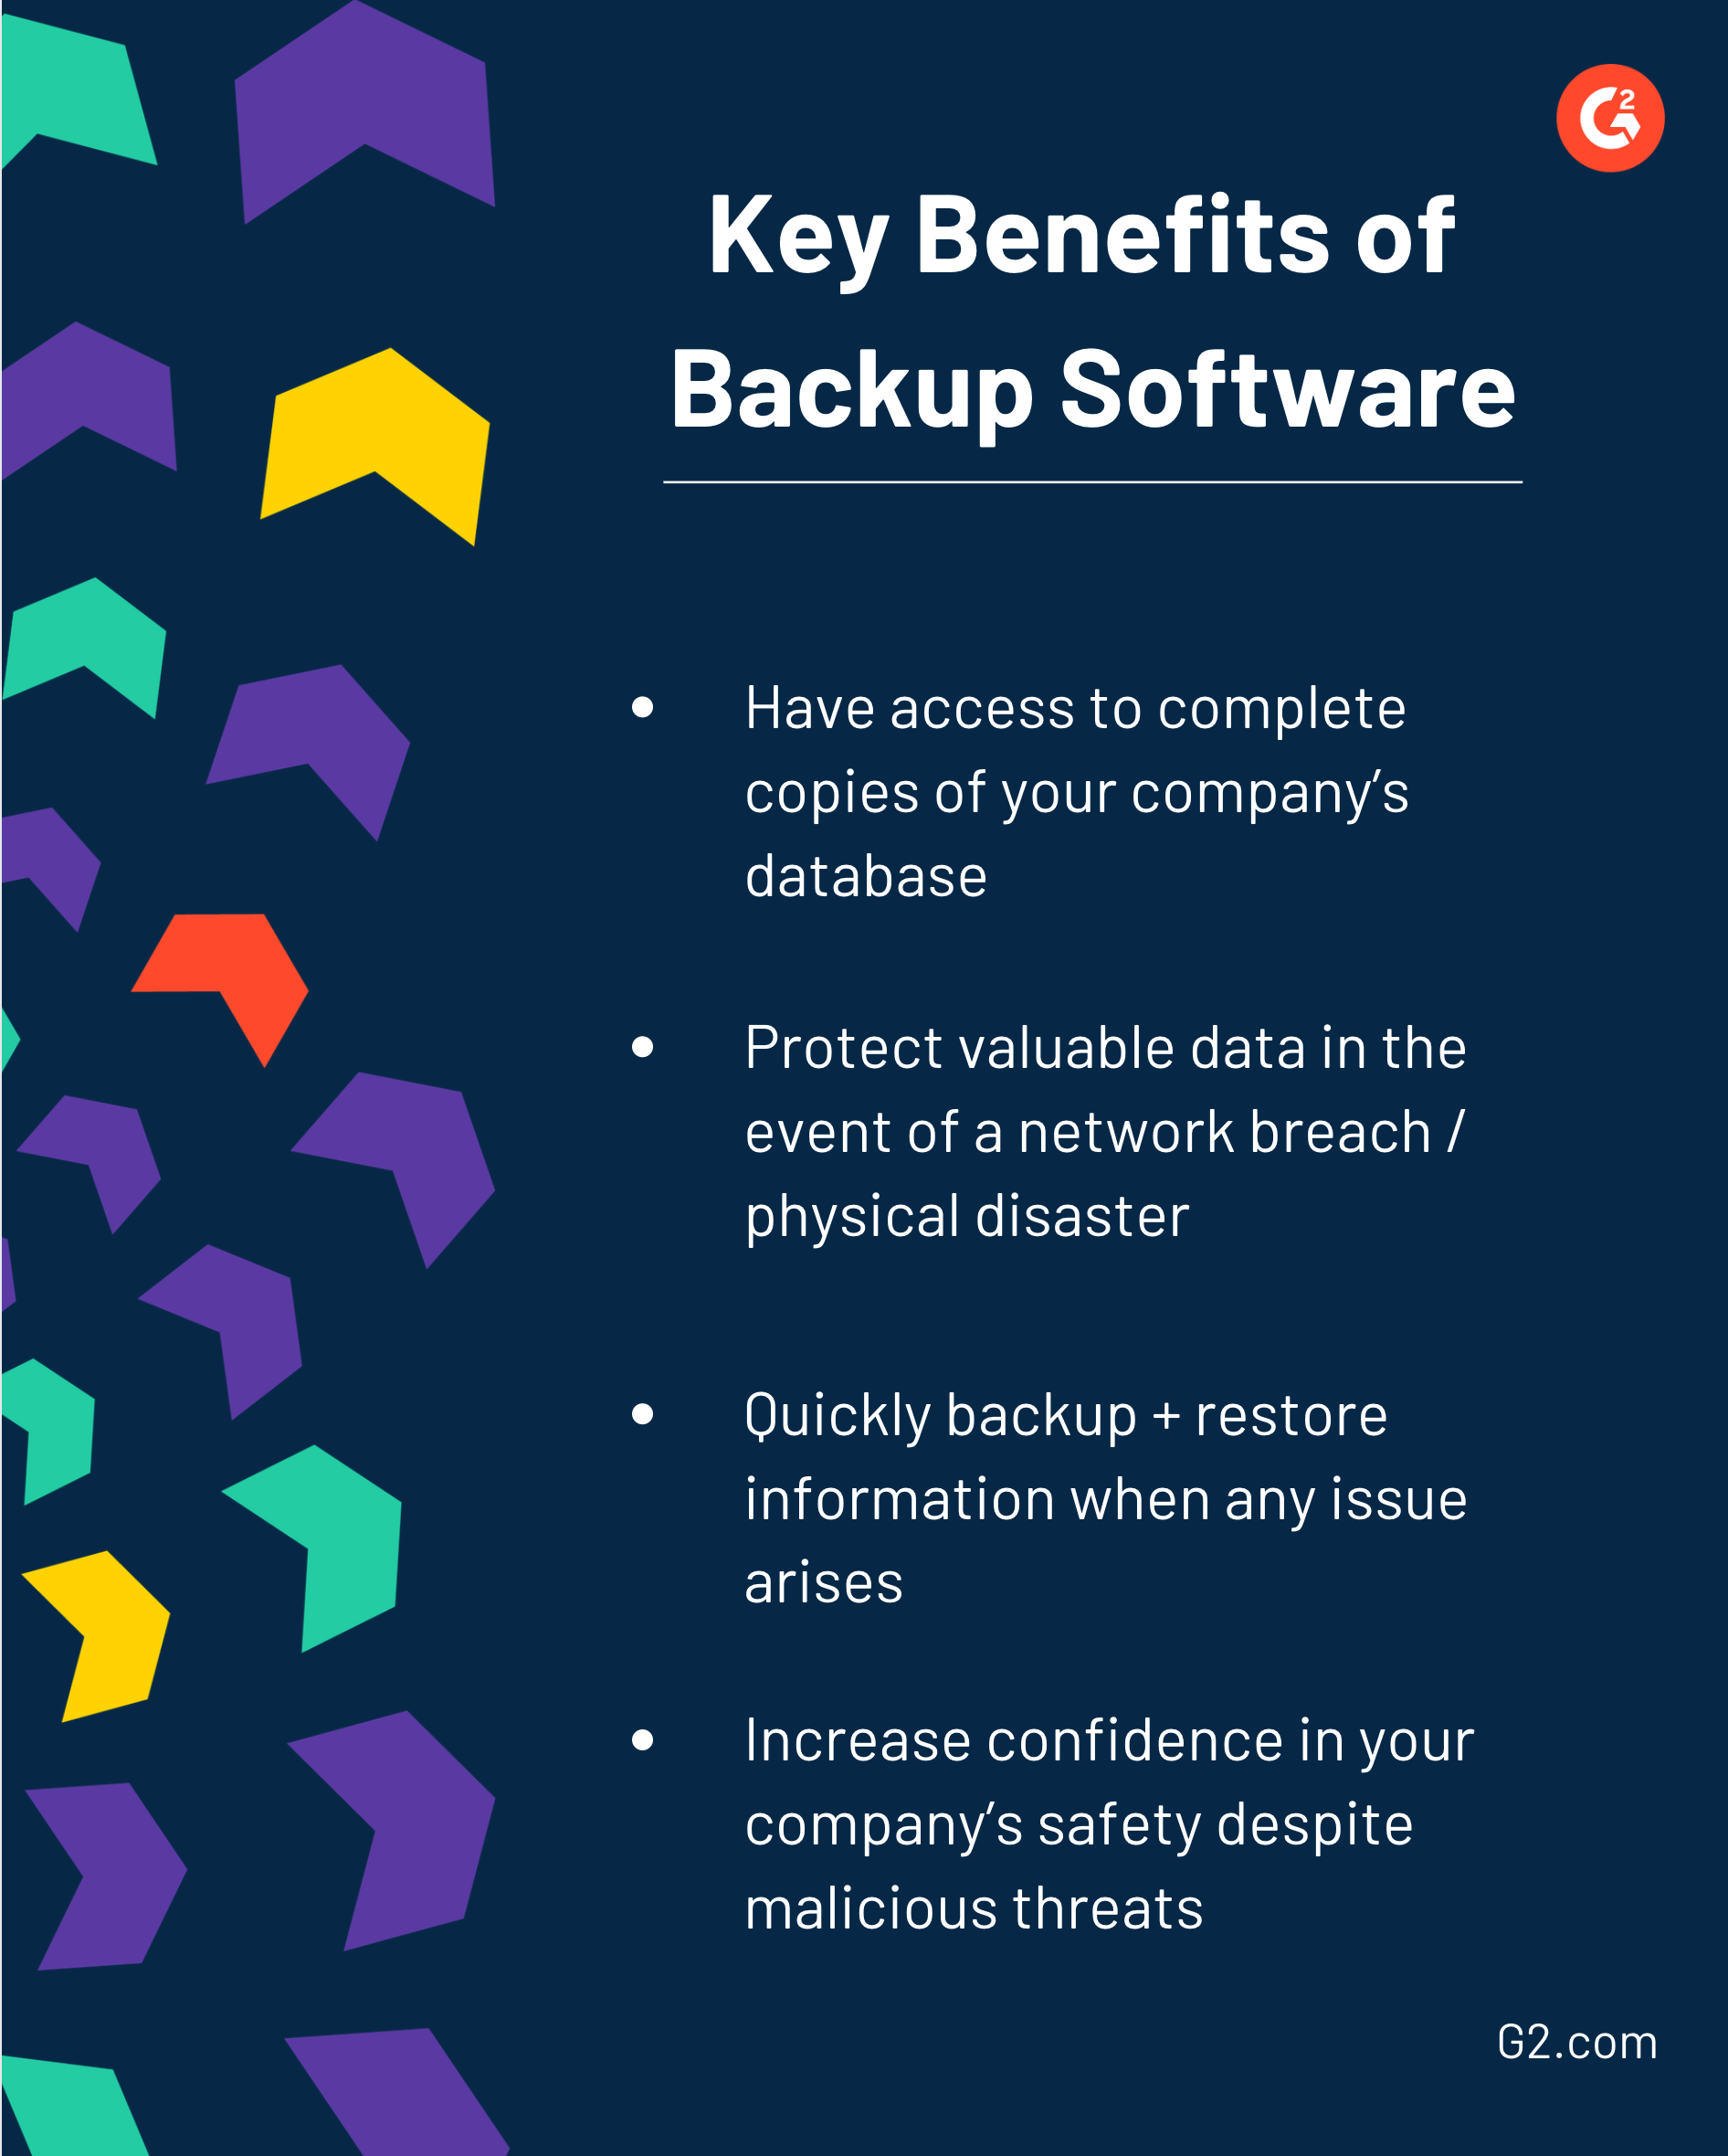 What is the purpose of backup storage?